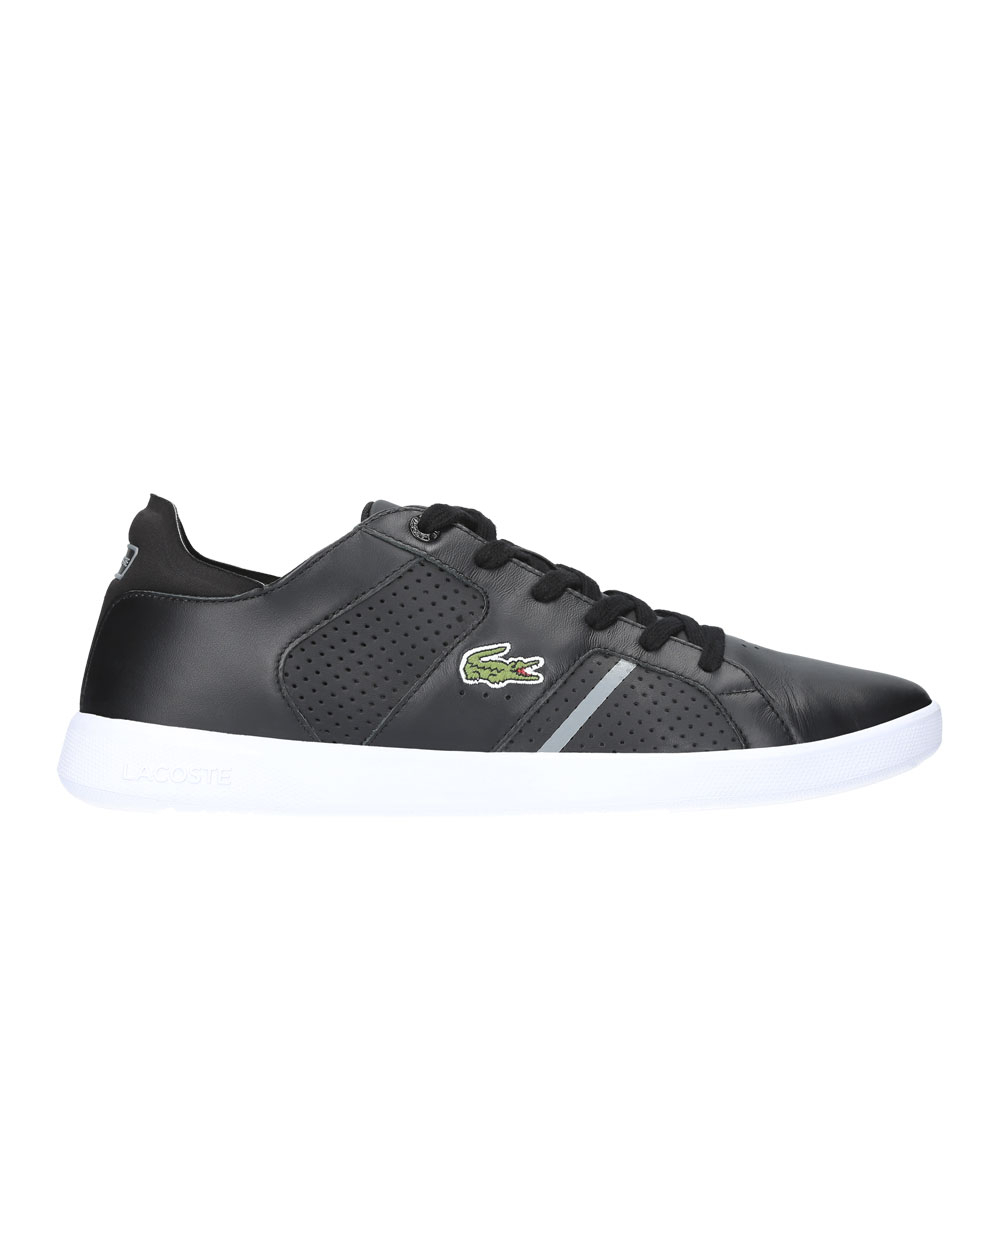 Lacoste Novas CT 118 2 SPM Mens Trainers All Sizes In Various Colours 